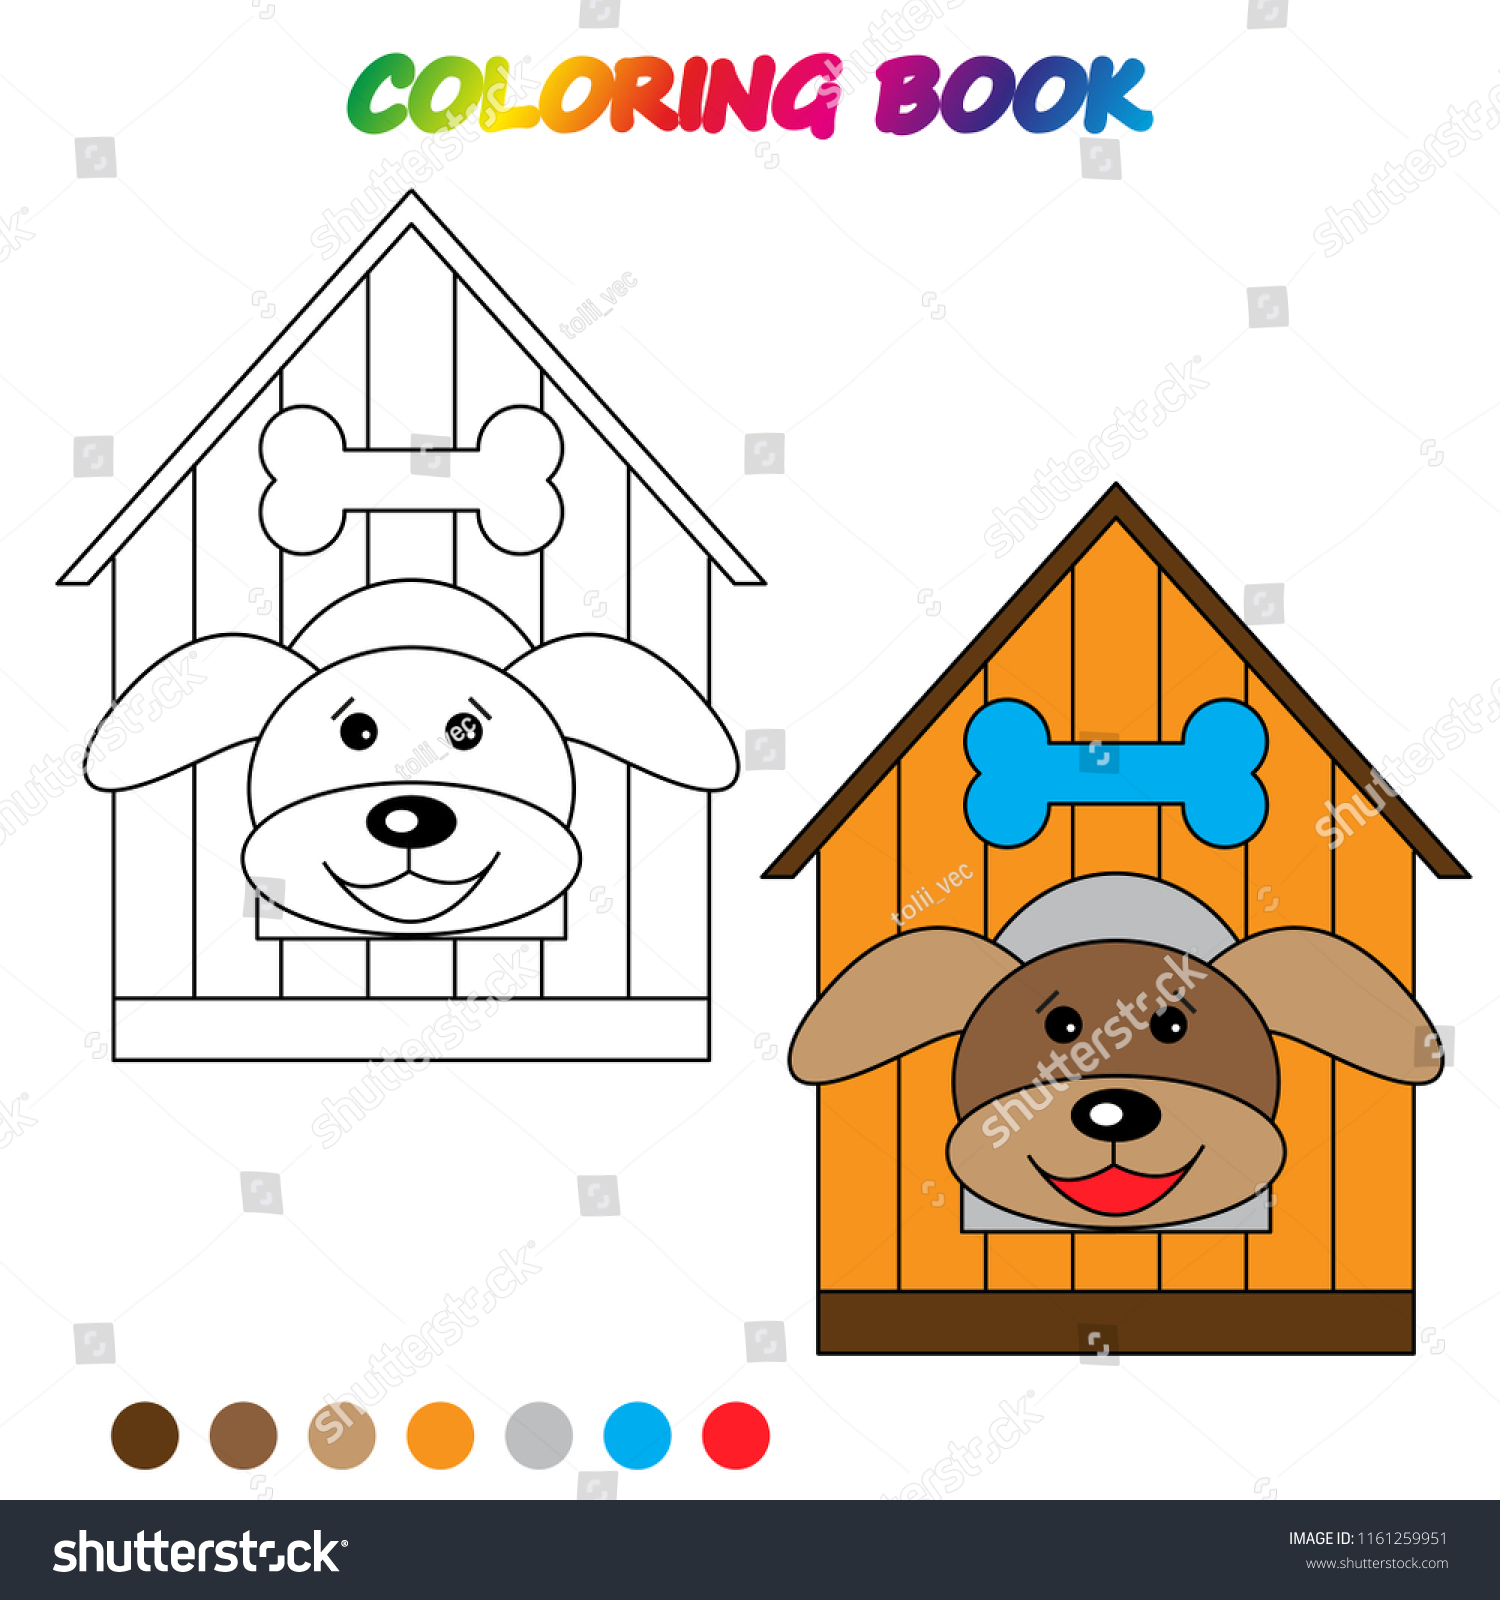 Dog House Coloring Page Worksheet Game Stock Vector Royalty Free ...